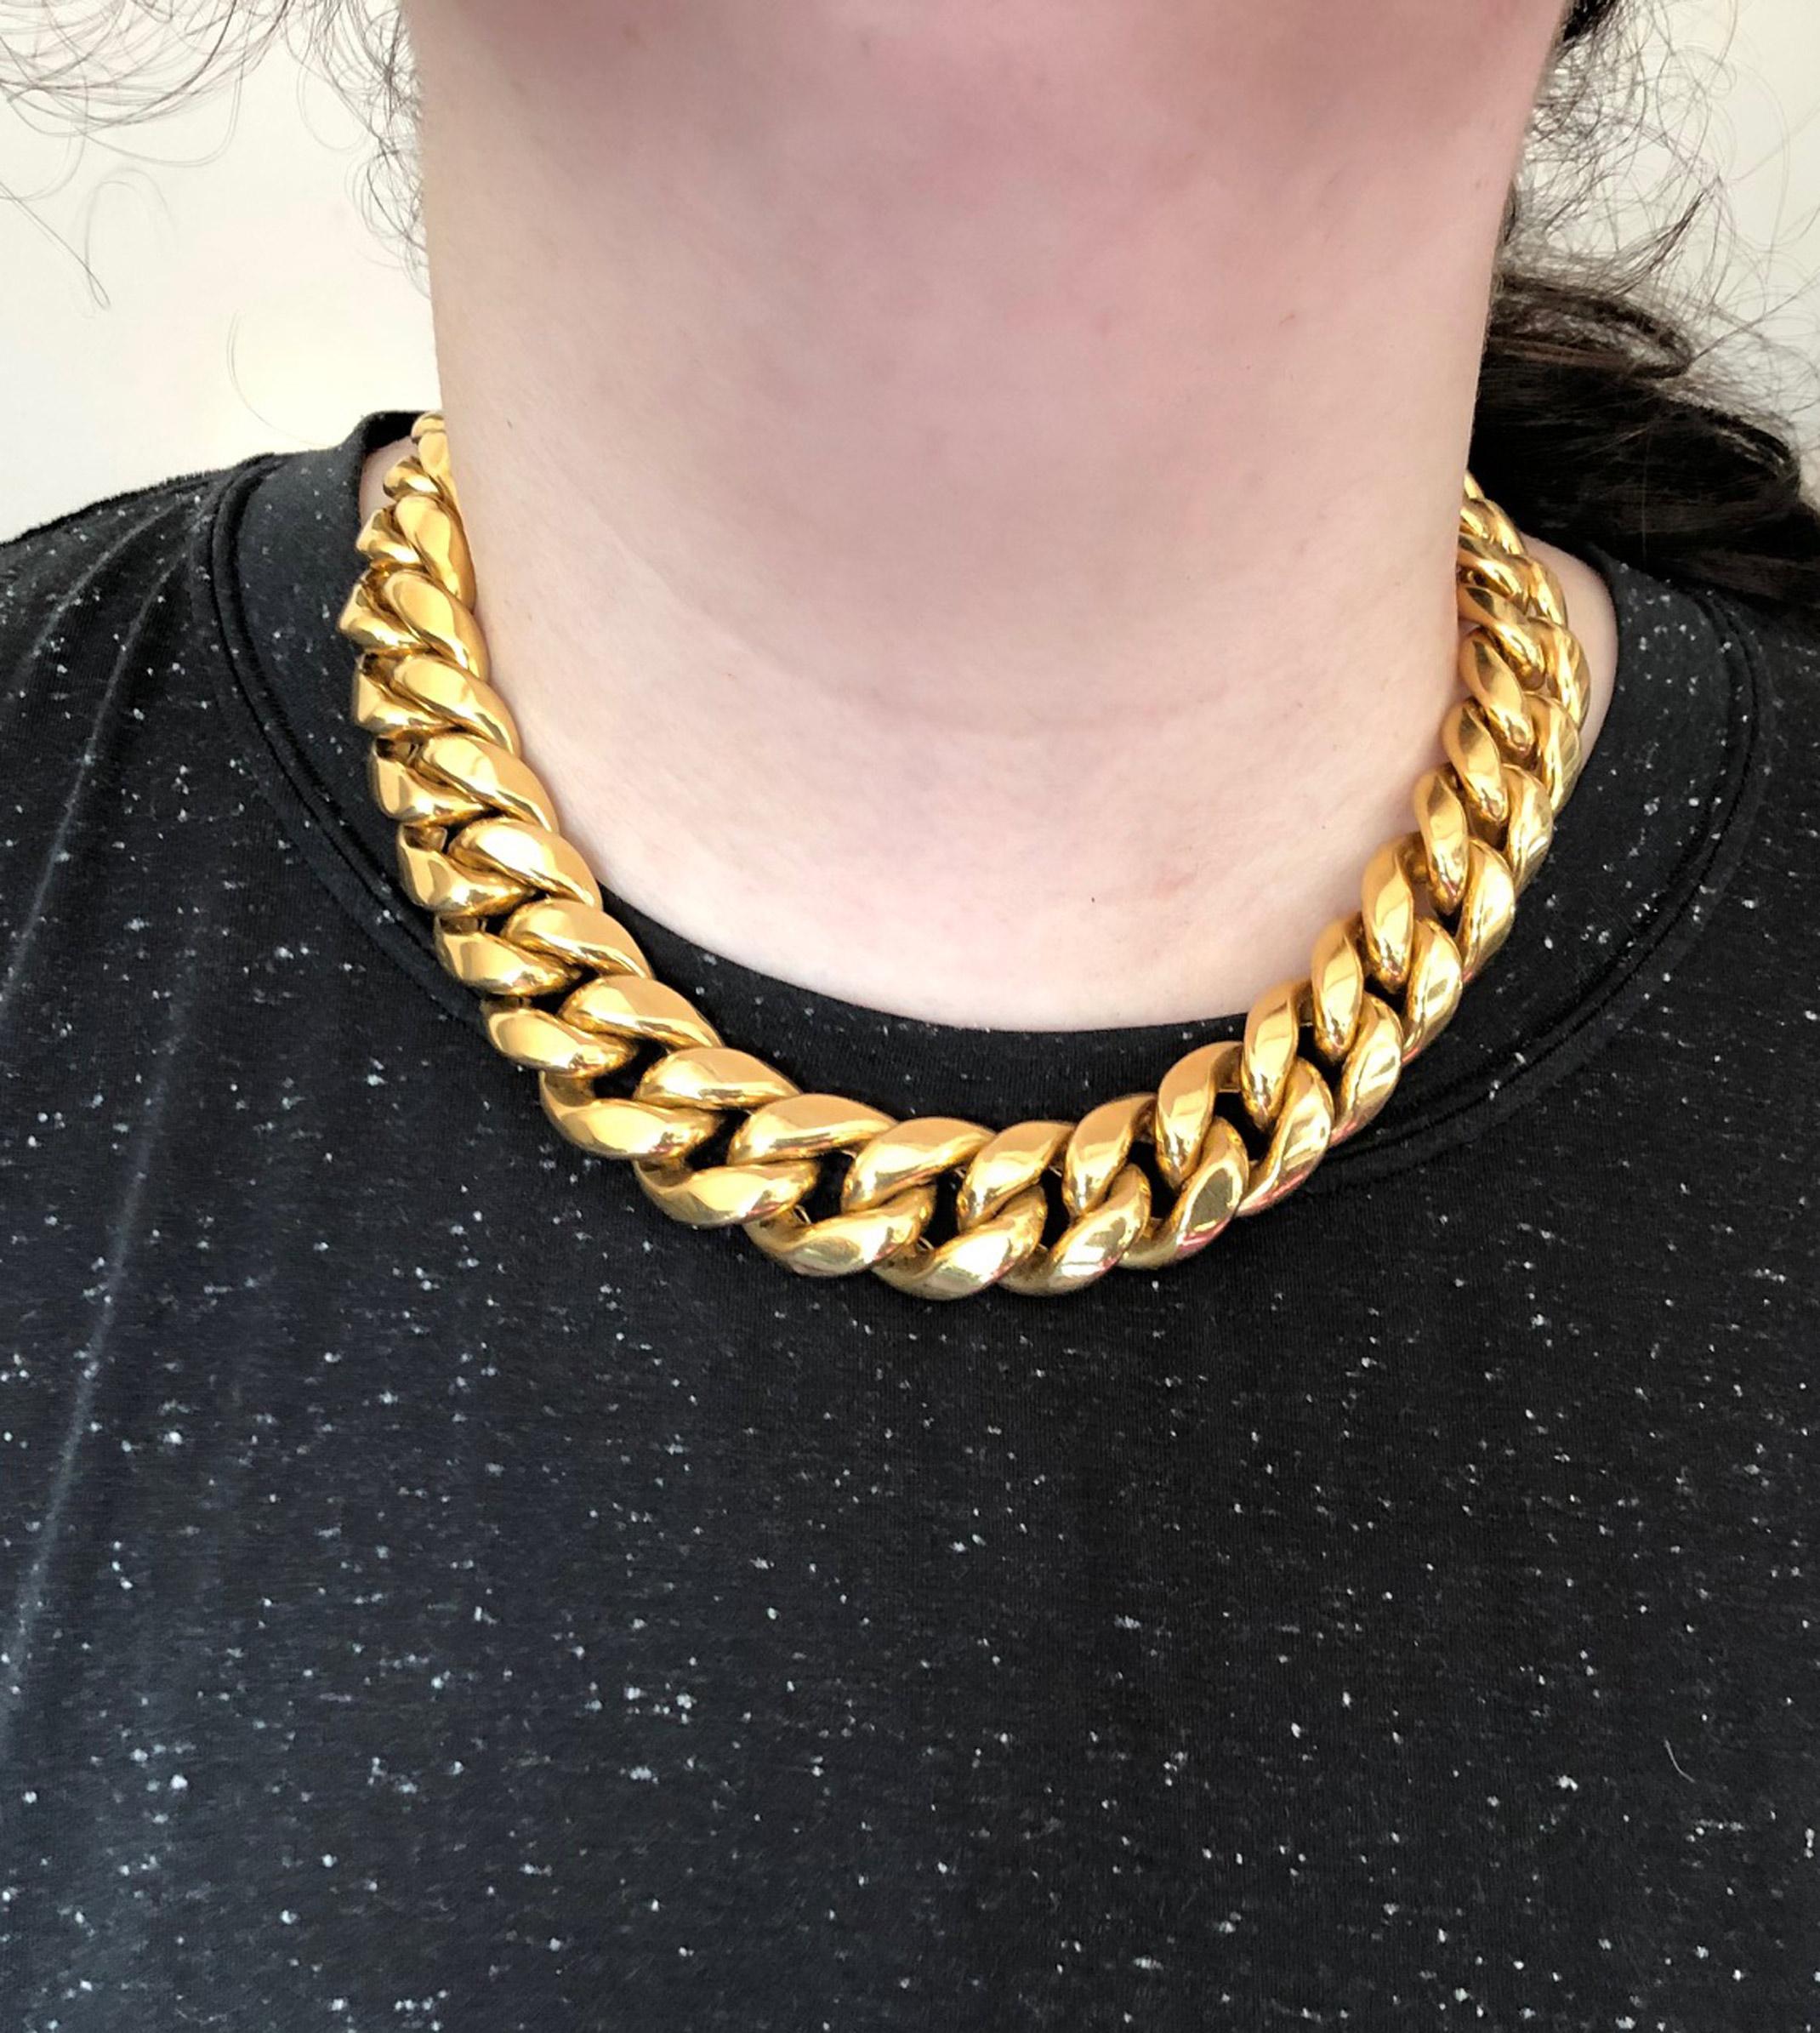 20in chain on neck